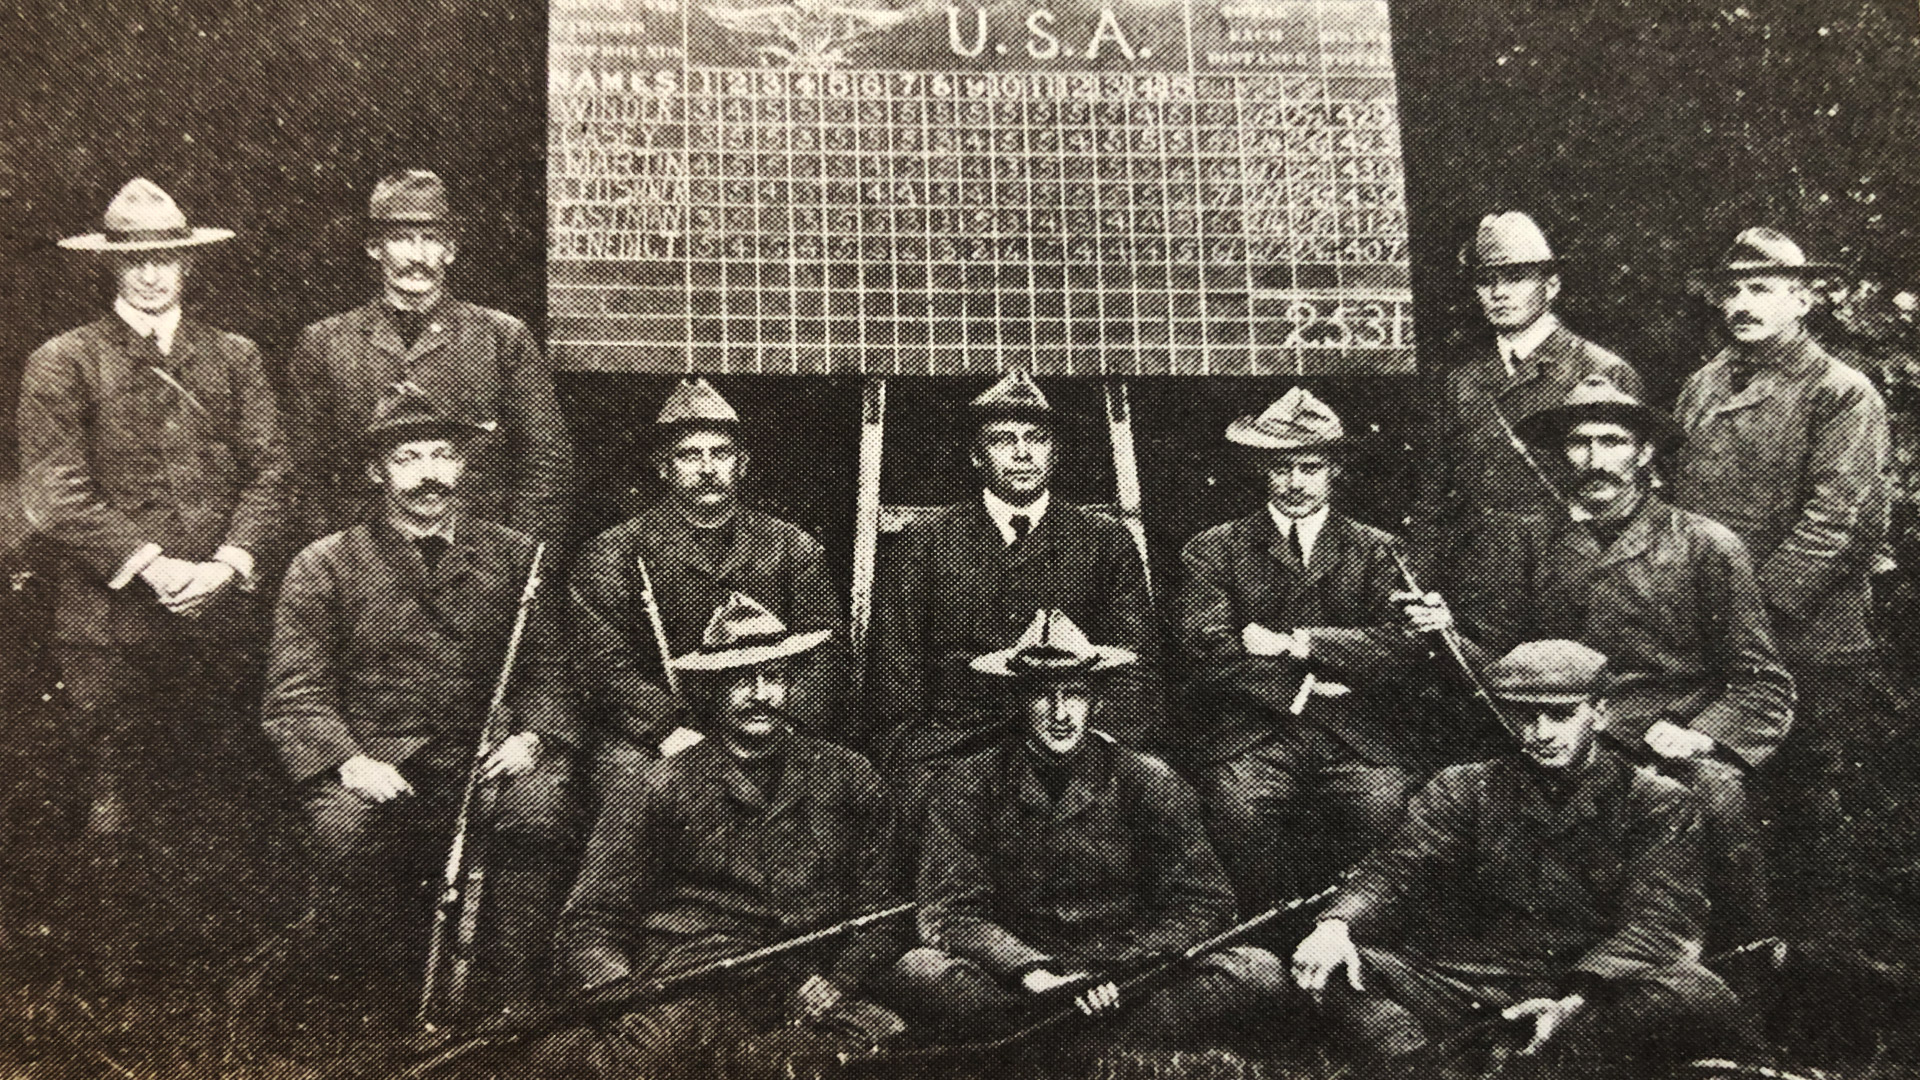 1908 U.S. Rifle Team at the London Olympic Games